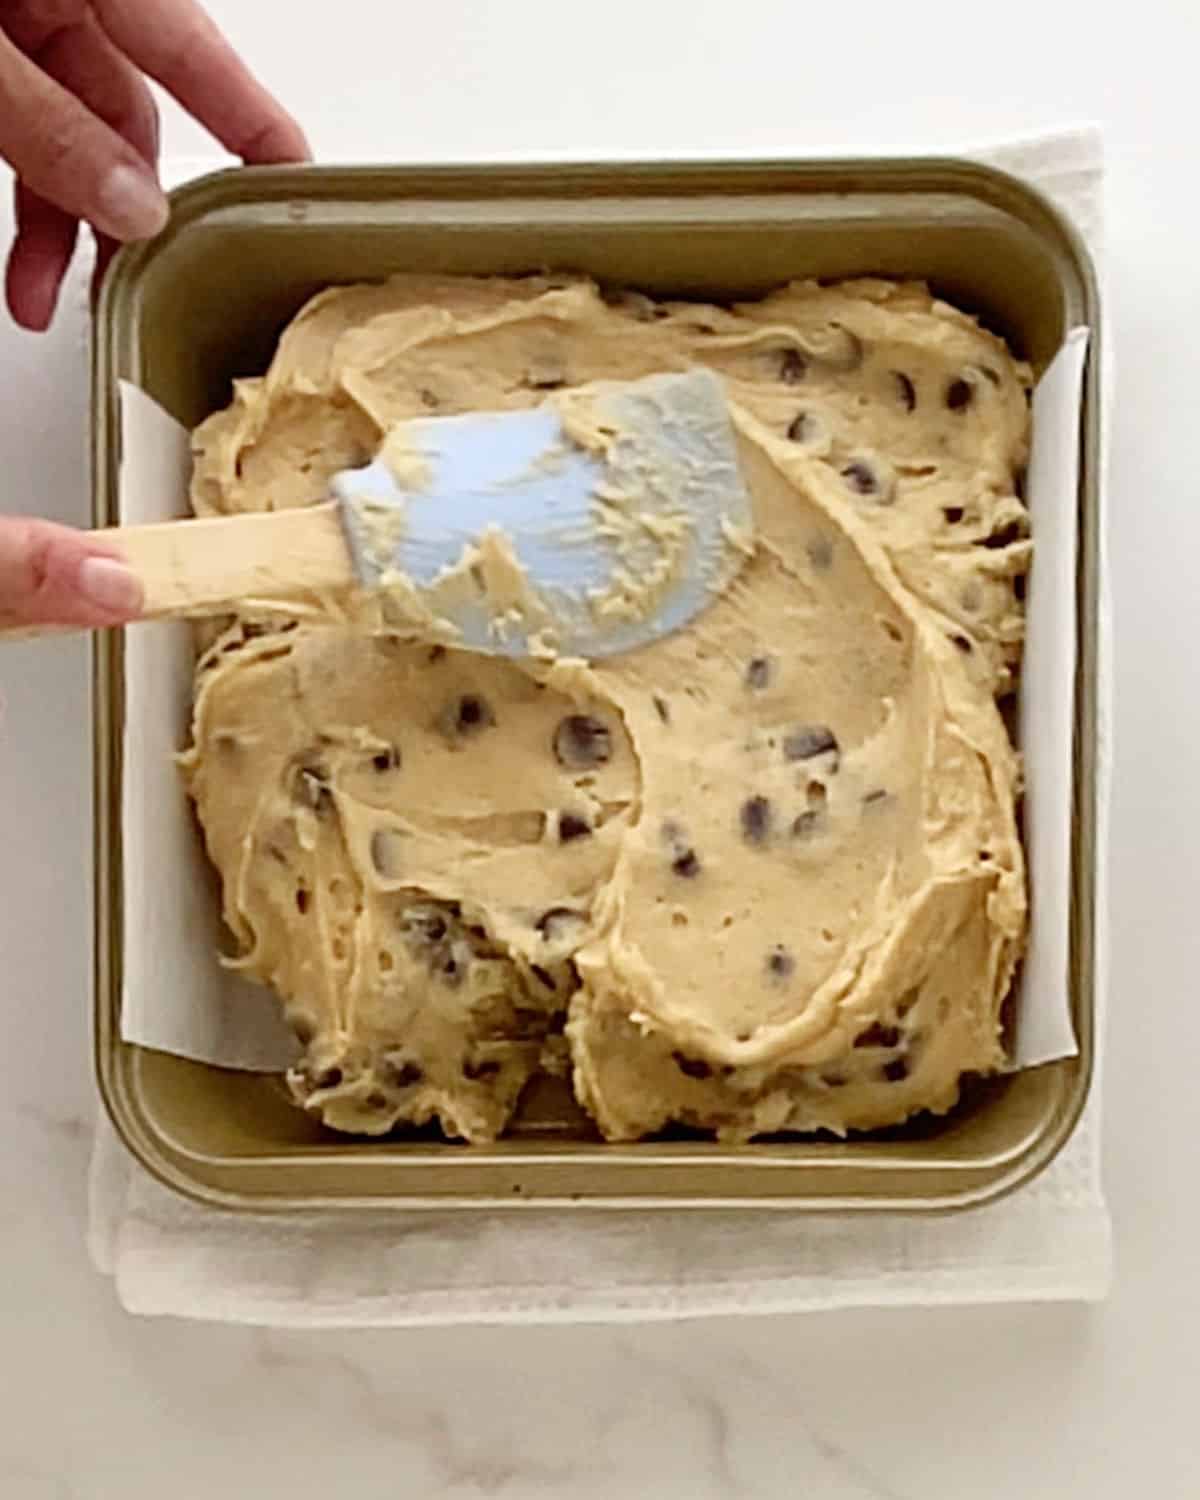 Spreading chocolate chip blondies dough in a metal pan with a spatula. White surface.